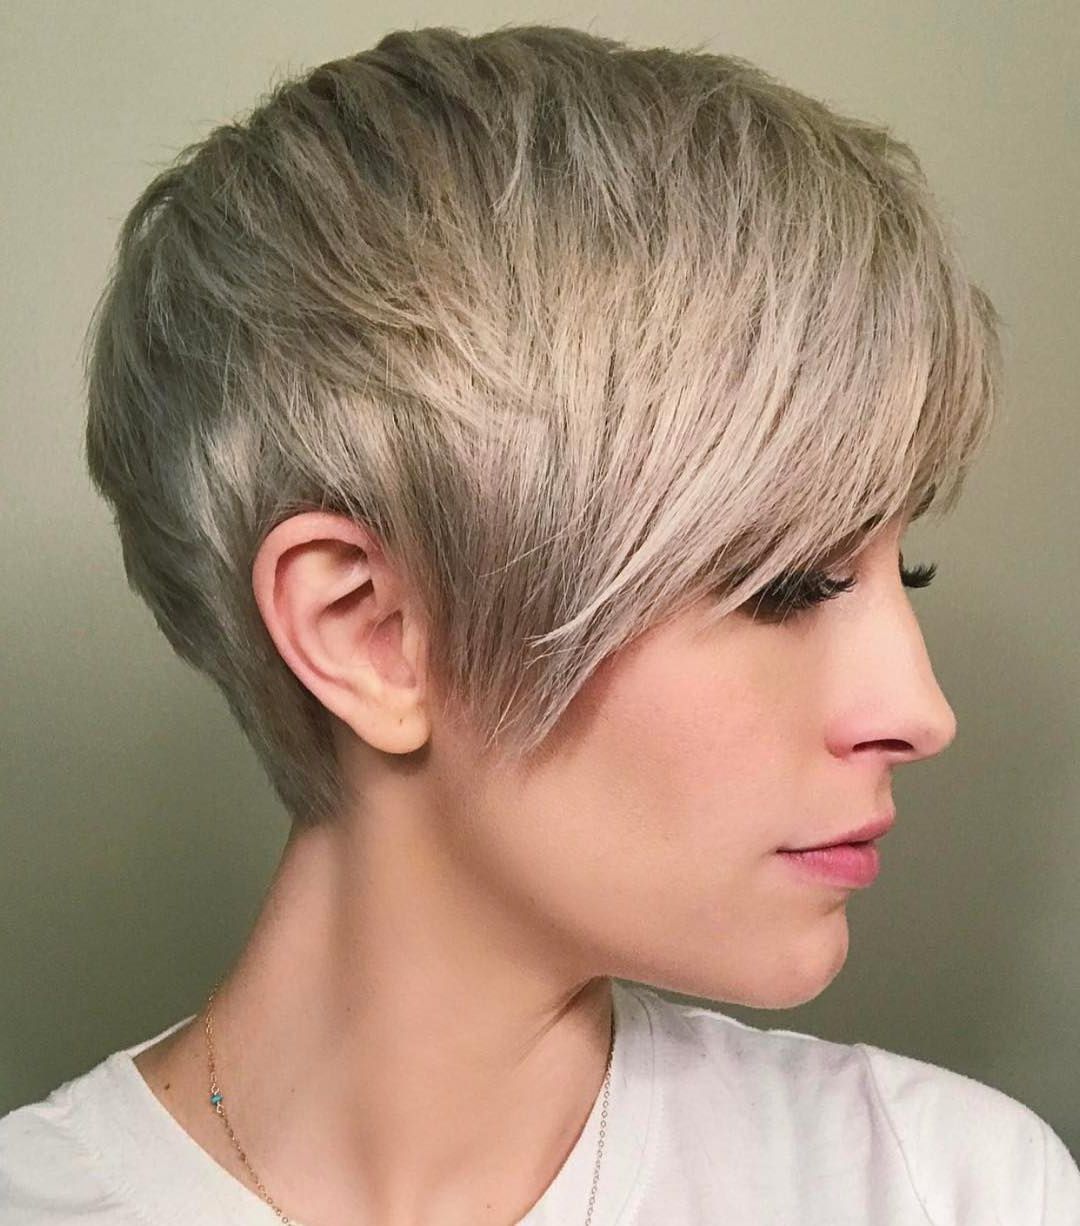 10 Best Short Straight Hairstyle Trends – Women Short Haircut Ideas 2018 For Asymmetrical Short Haircuts For Women (View 23 of 25)